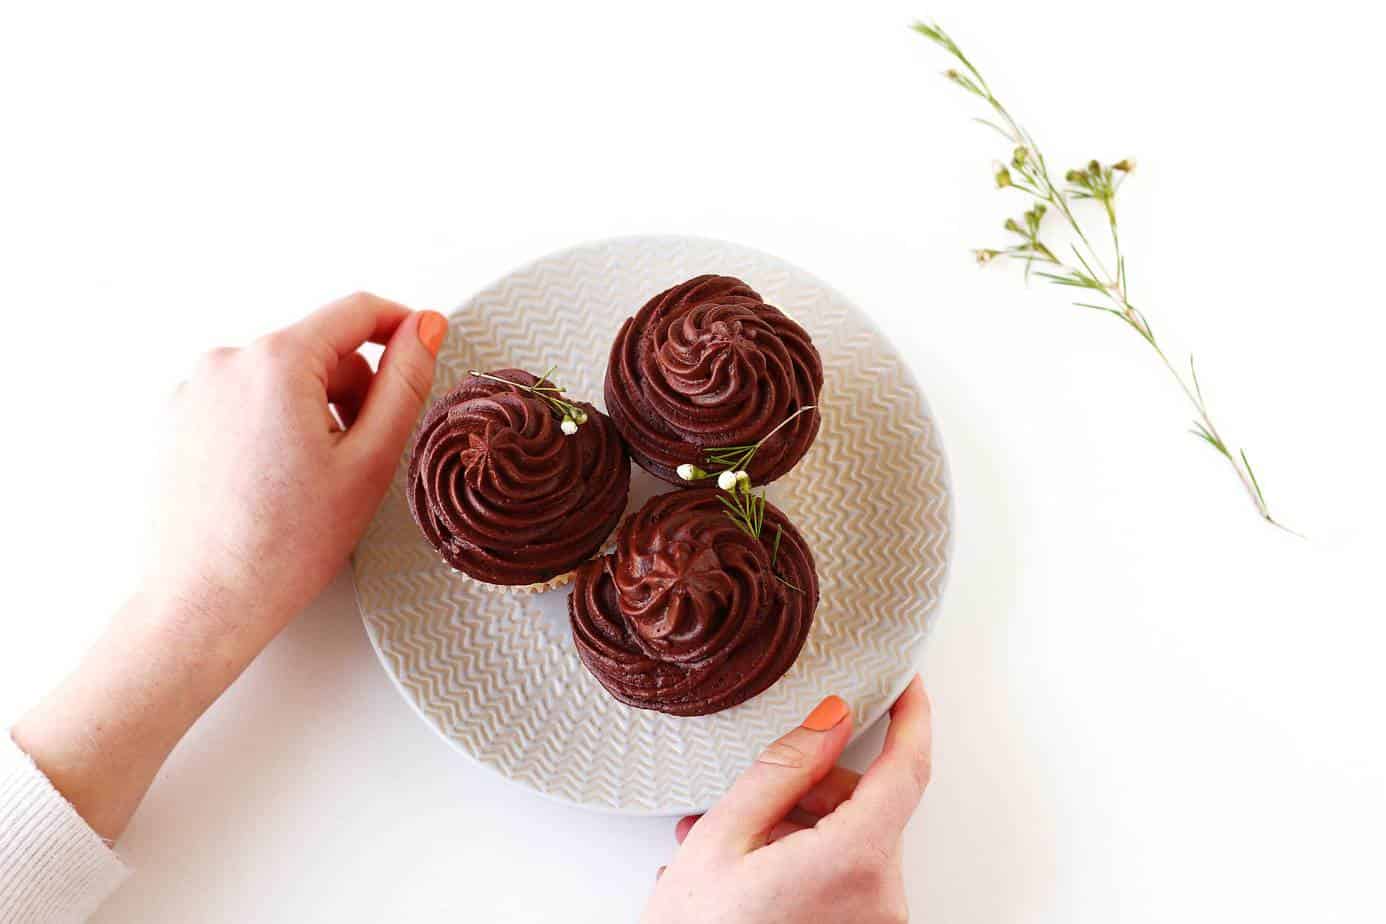 The ultimate go to cupcake recipe, these Easy Vanilla Cupcakes with Creamy Chocolate Frosting only take a few minutes to whip up and can be frozen for up to a few weeks! The only cupcake recipe you will ever need!